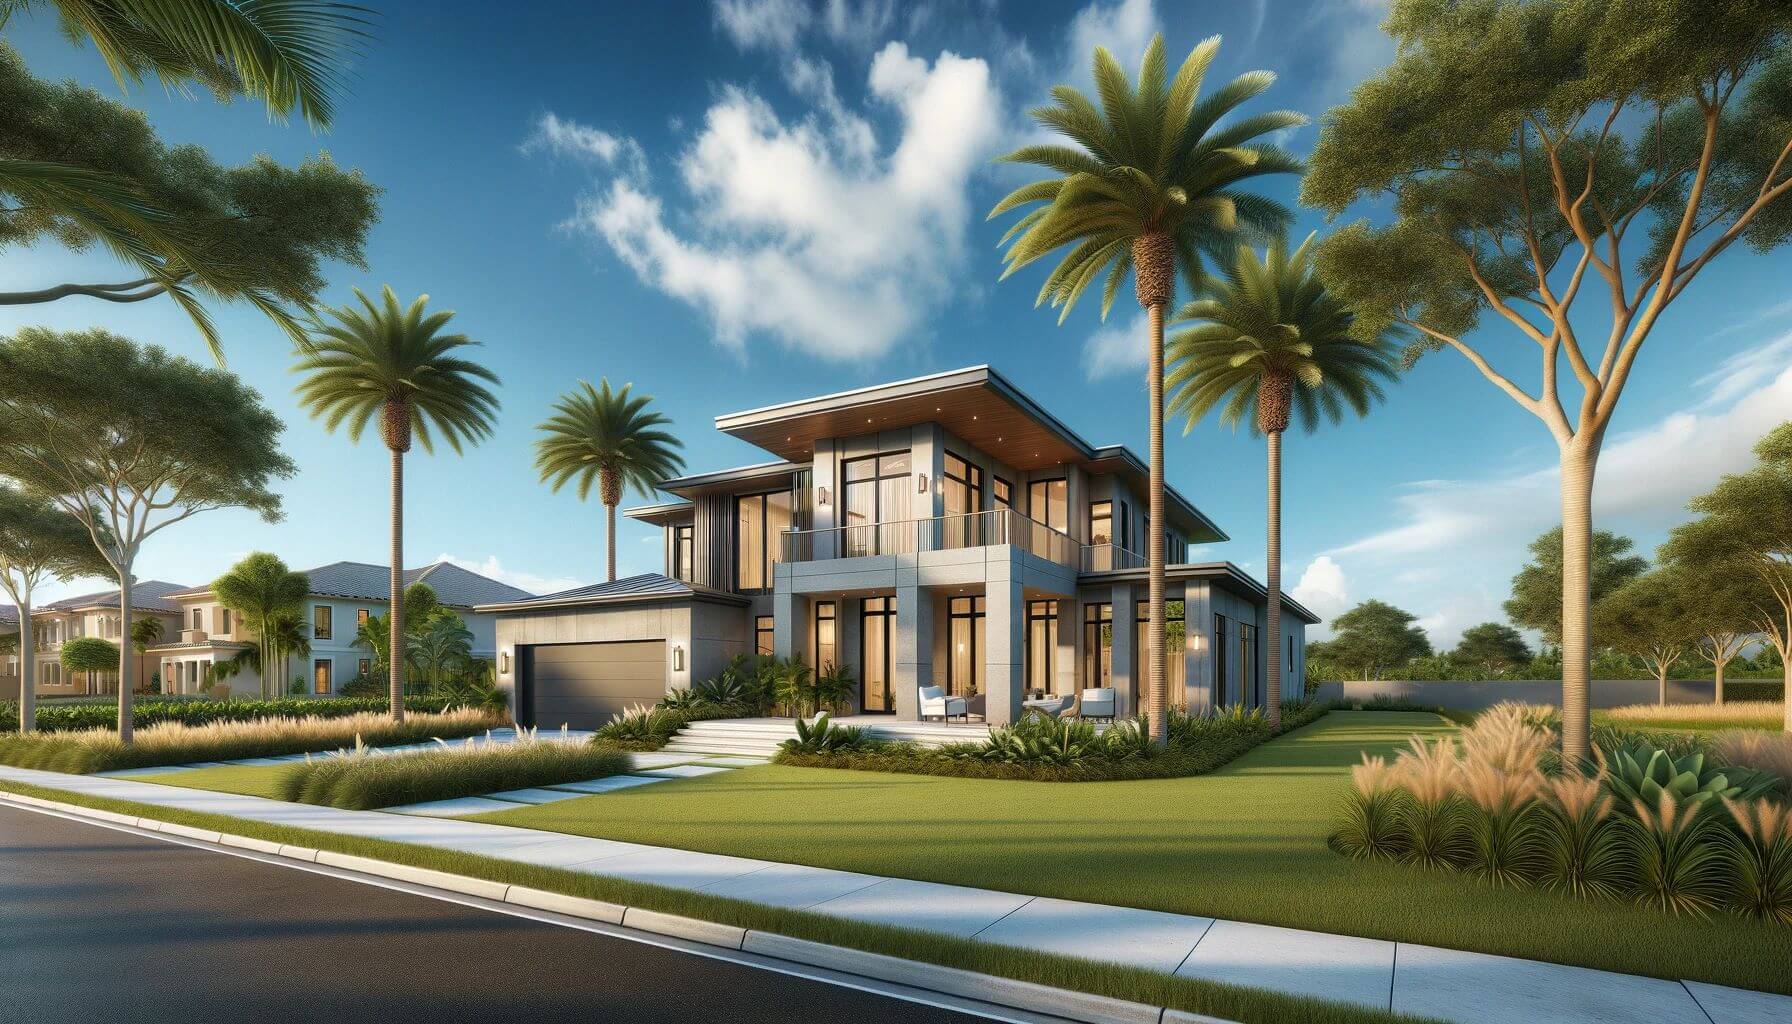 New Construction Home in Florida under $200k